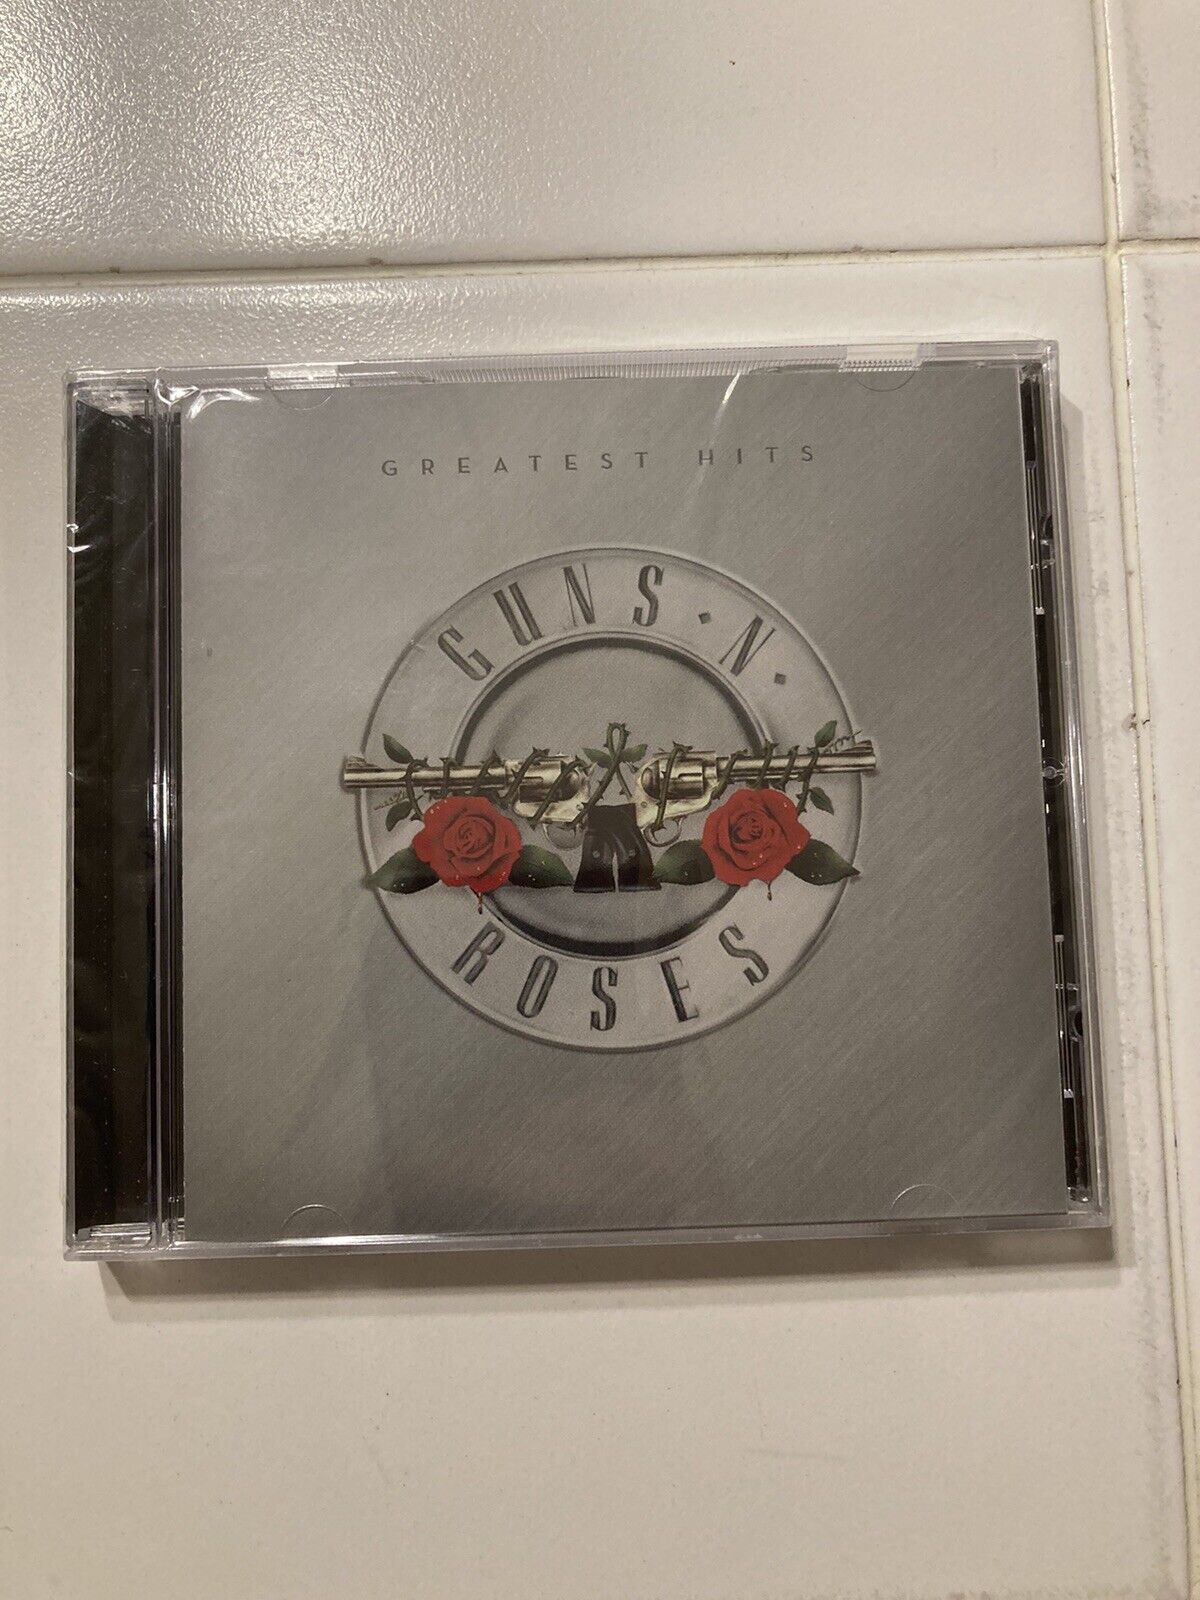 Greatest Hits by Guns N' Roses (CD, 2004) (sealed)